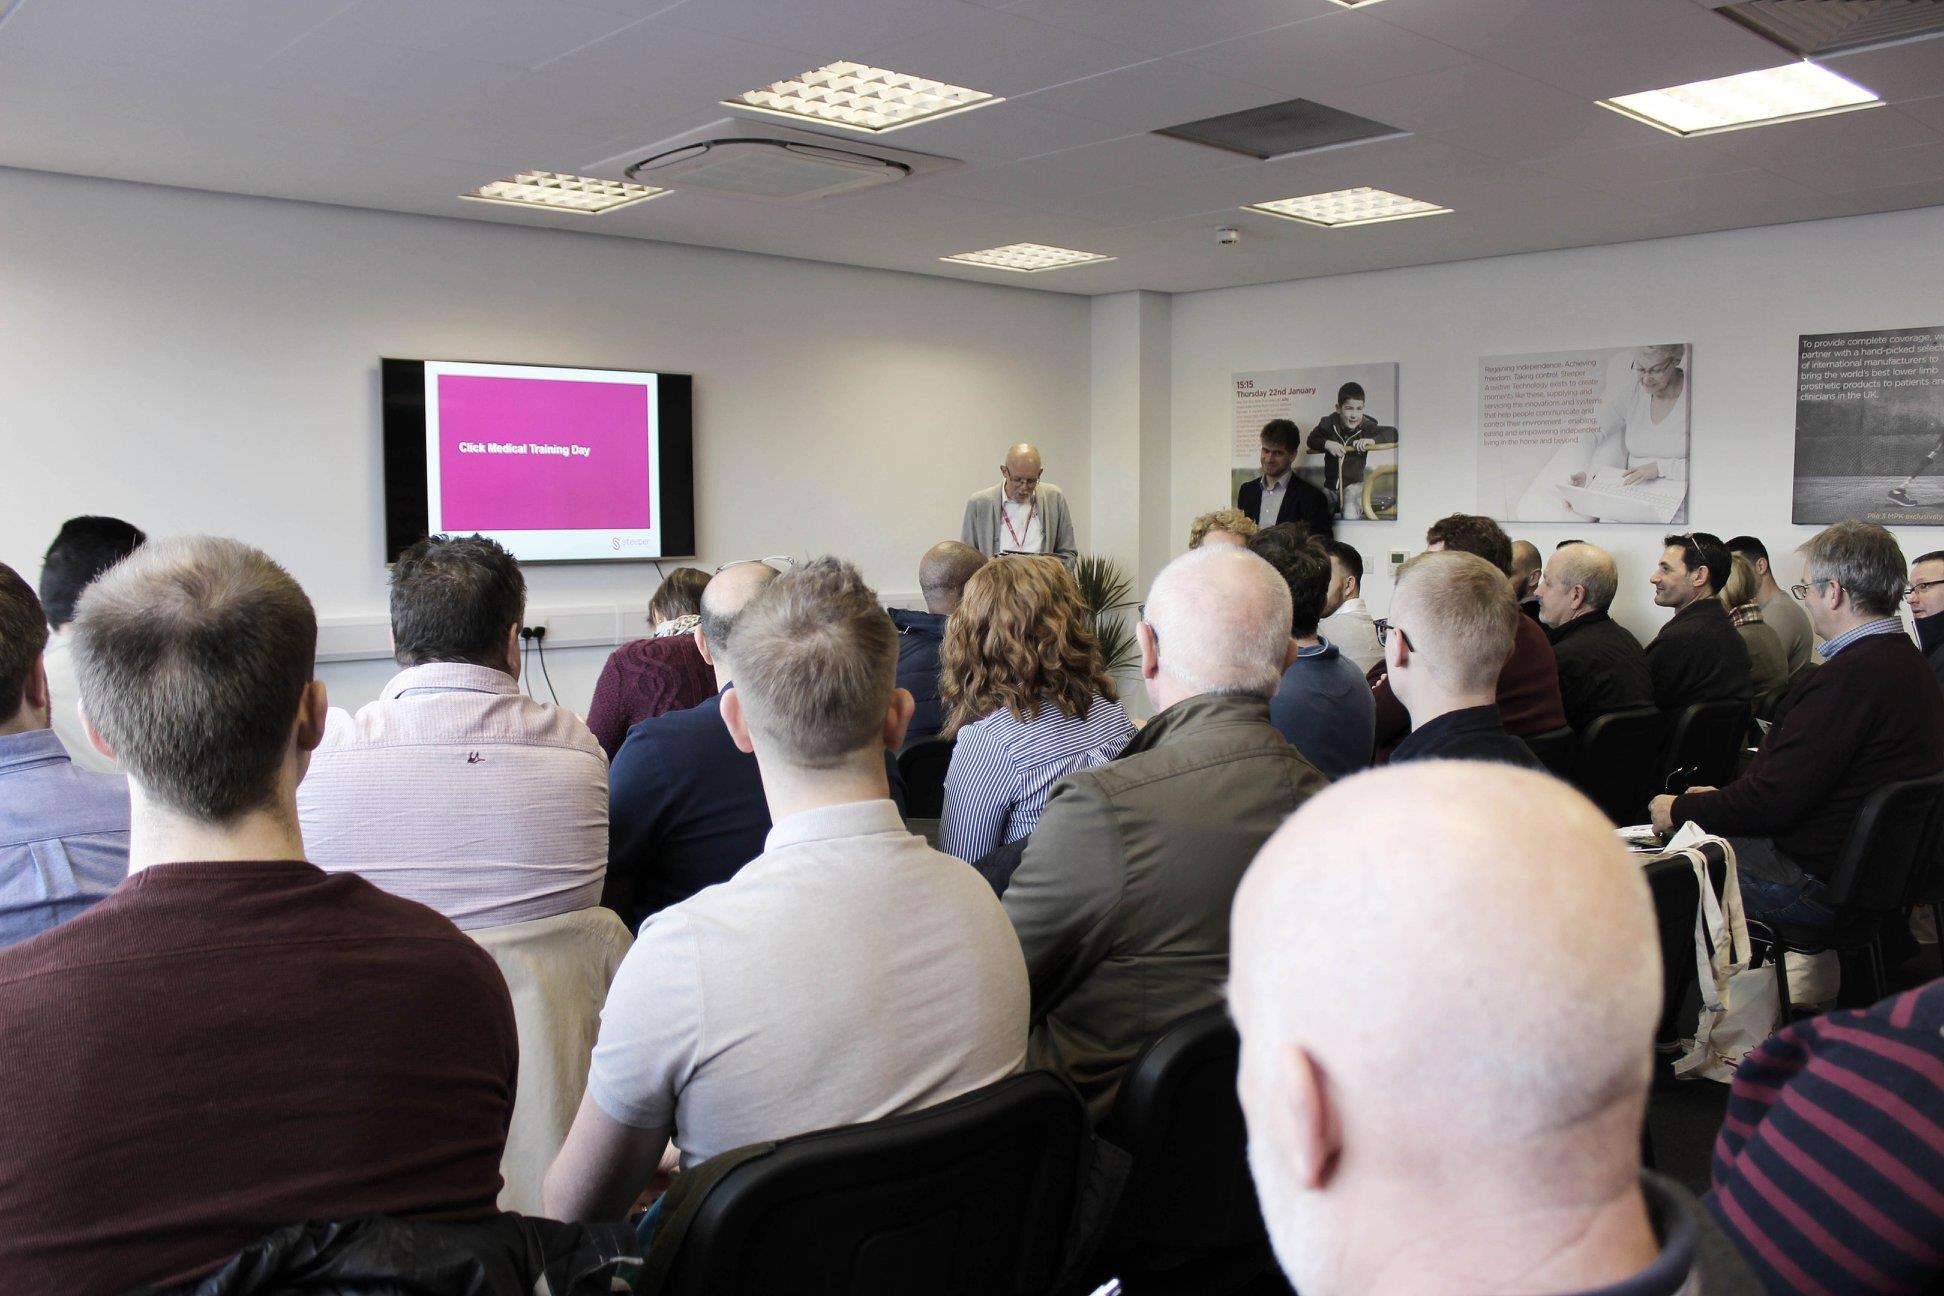 The First UK Click Medical Training Days at Steeper HQ